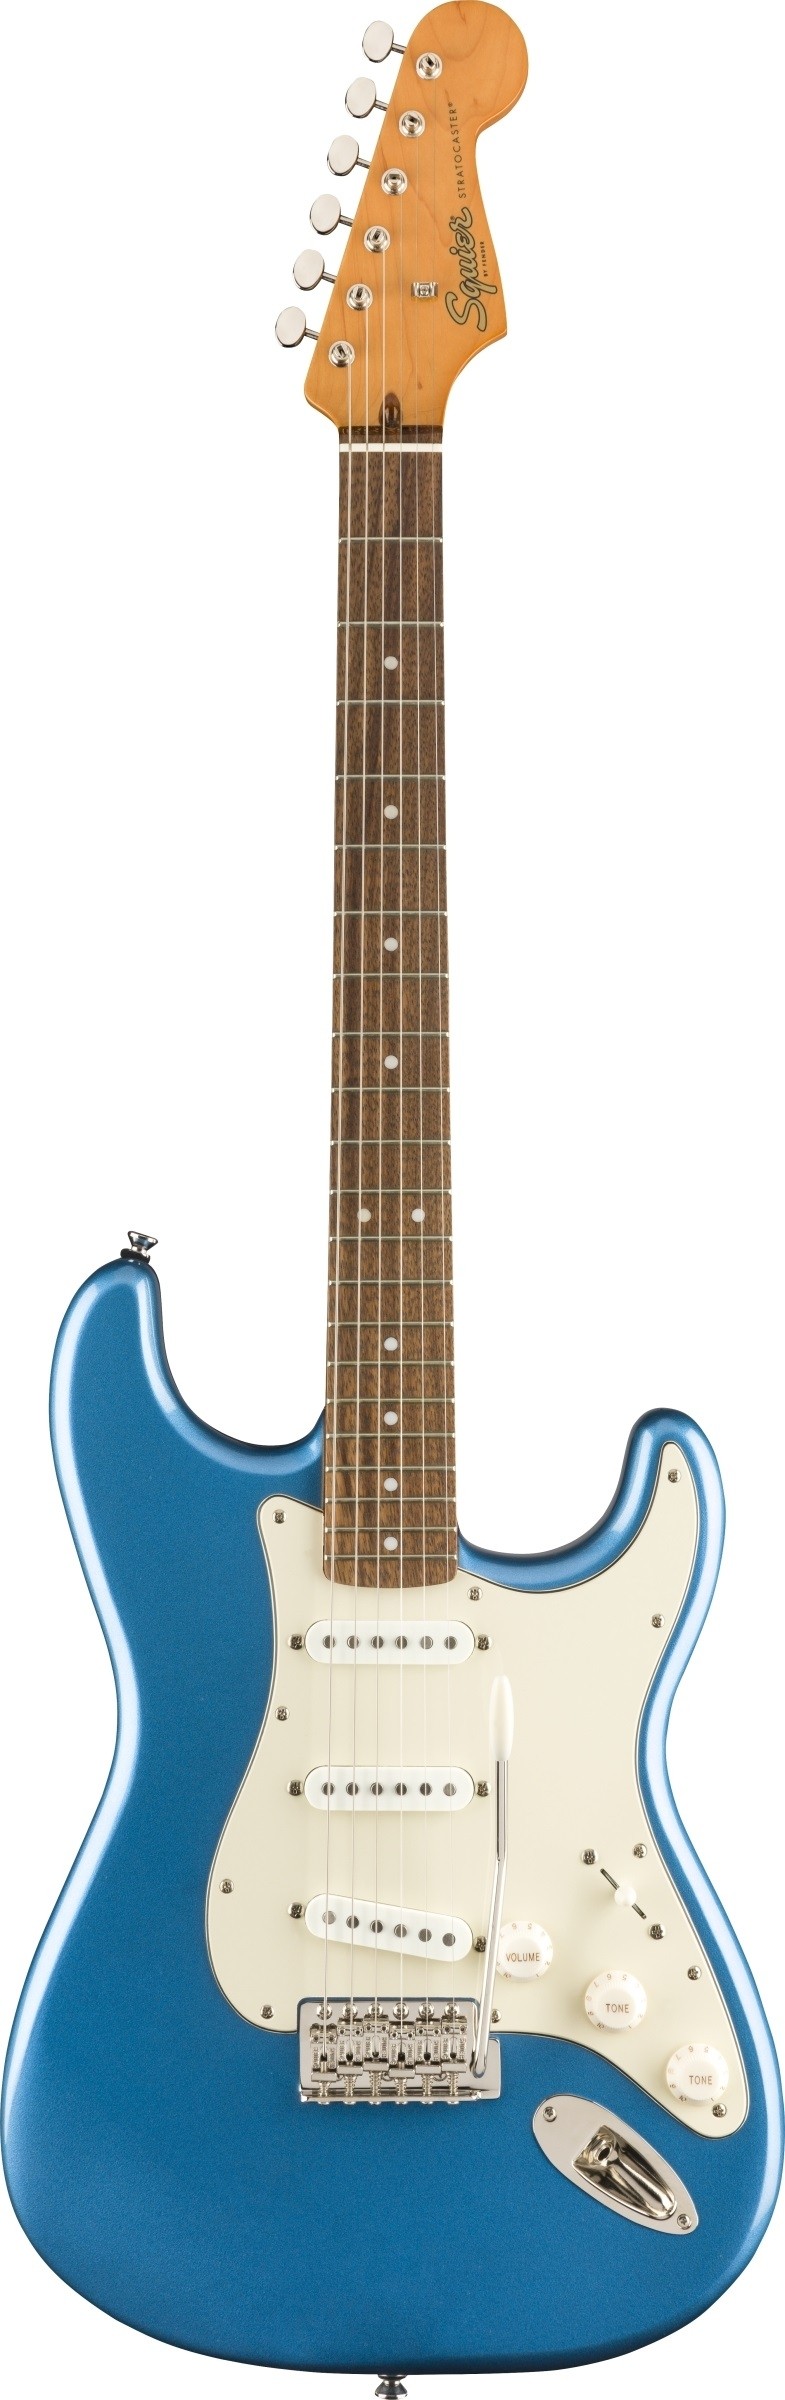 Squier Classic Vibe 60s Stratocaster - Lake Placid Blue